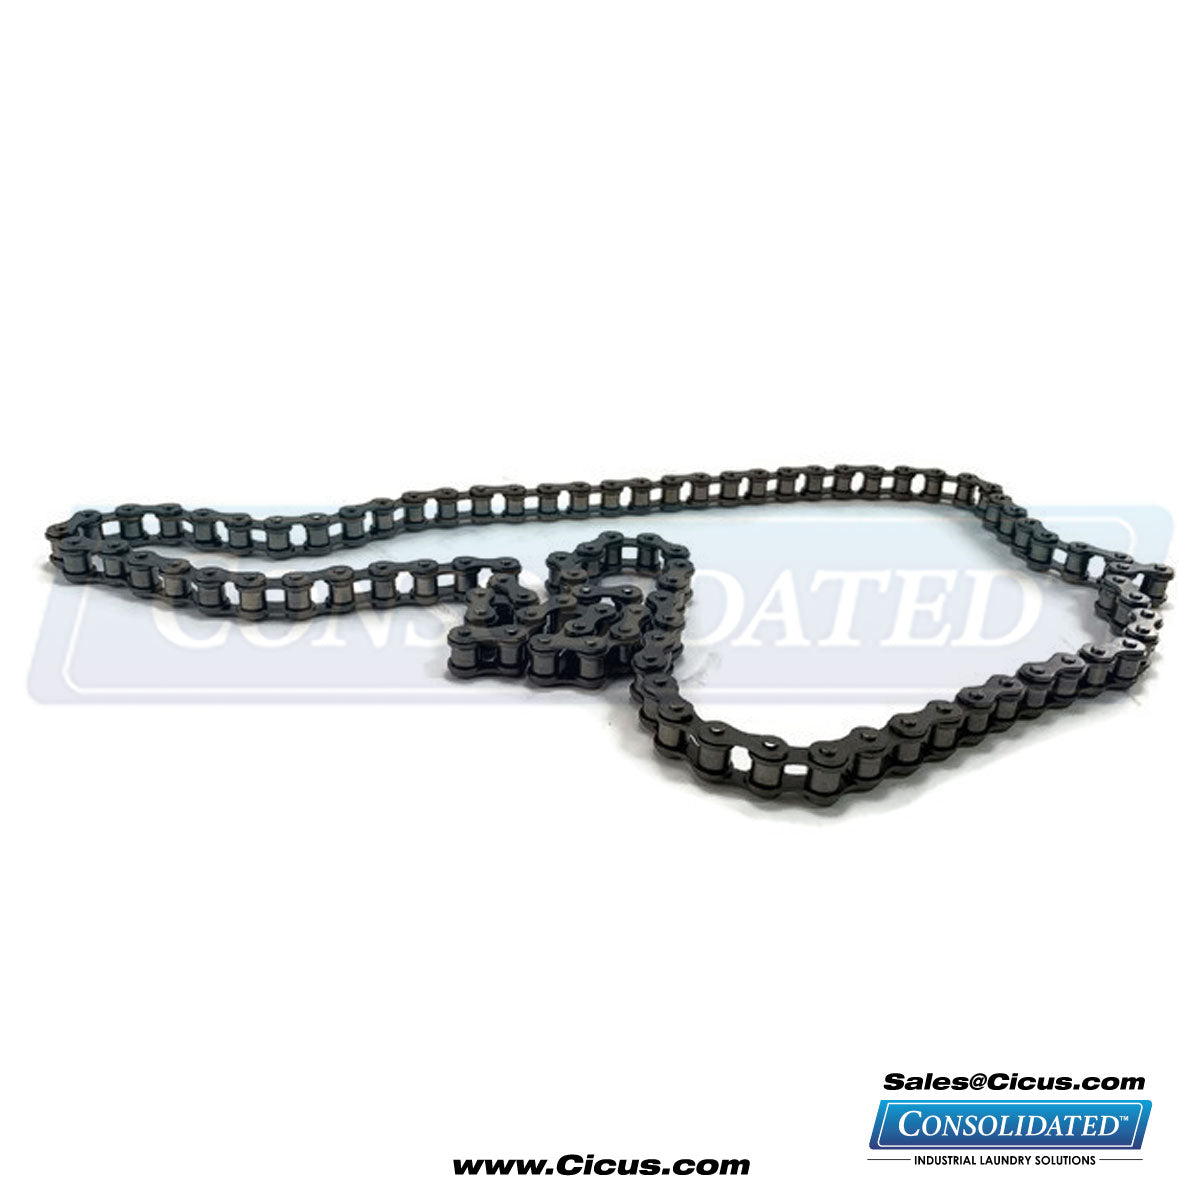 Alliance Laundry Systems Chain / Roller #41 - 48" [M401425]